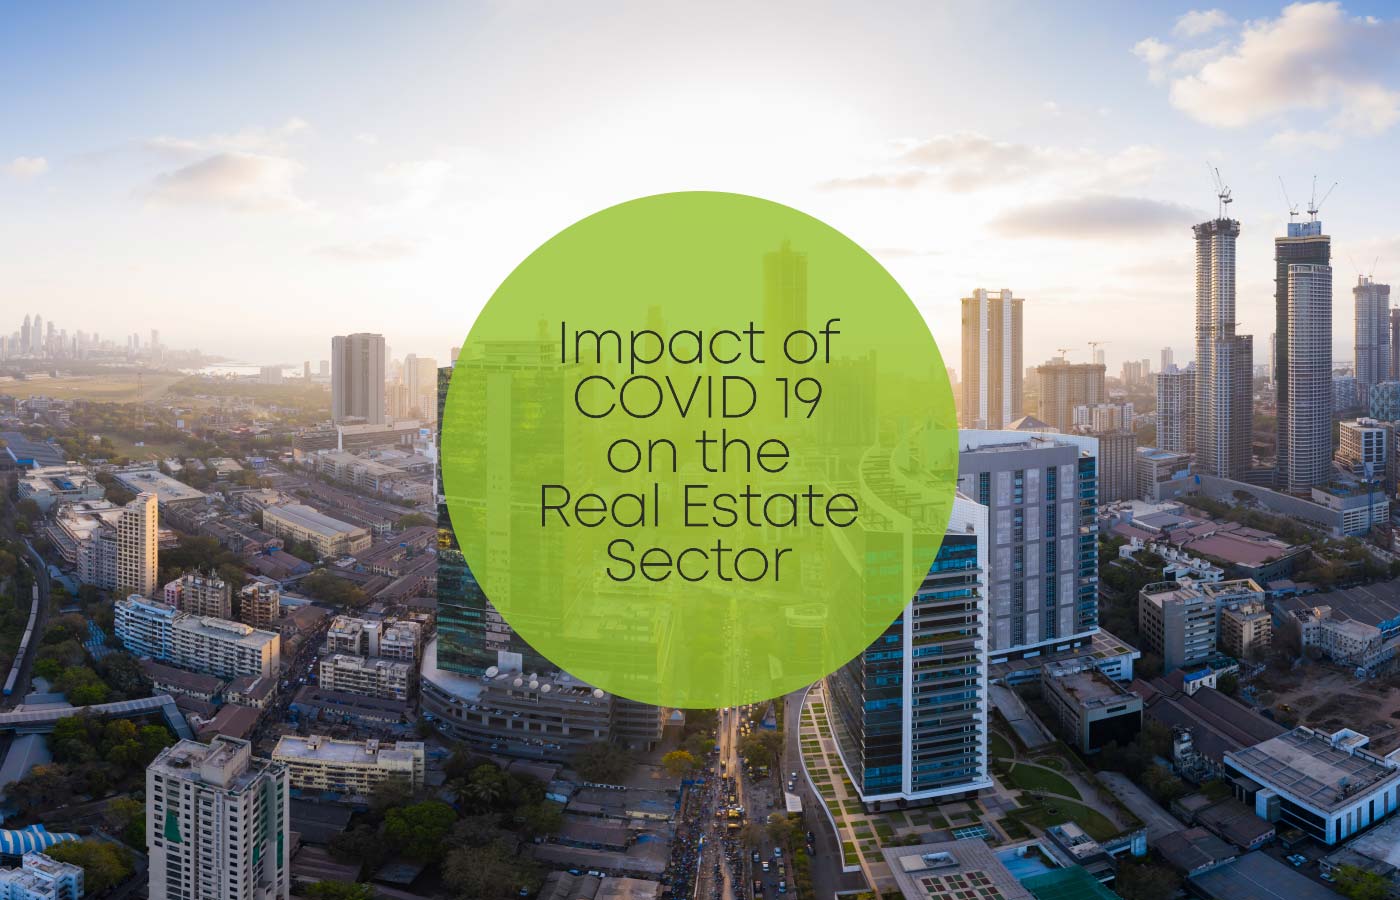 Impact of COVID-19 on the Real Estate Sector